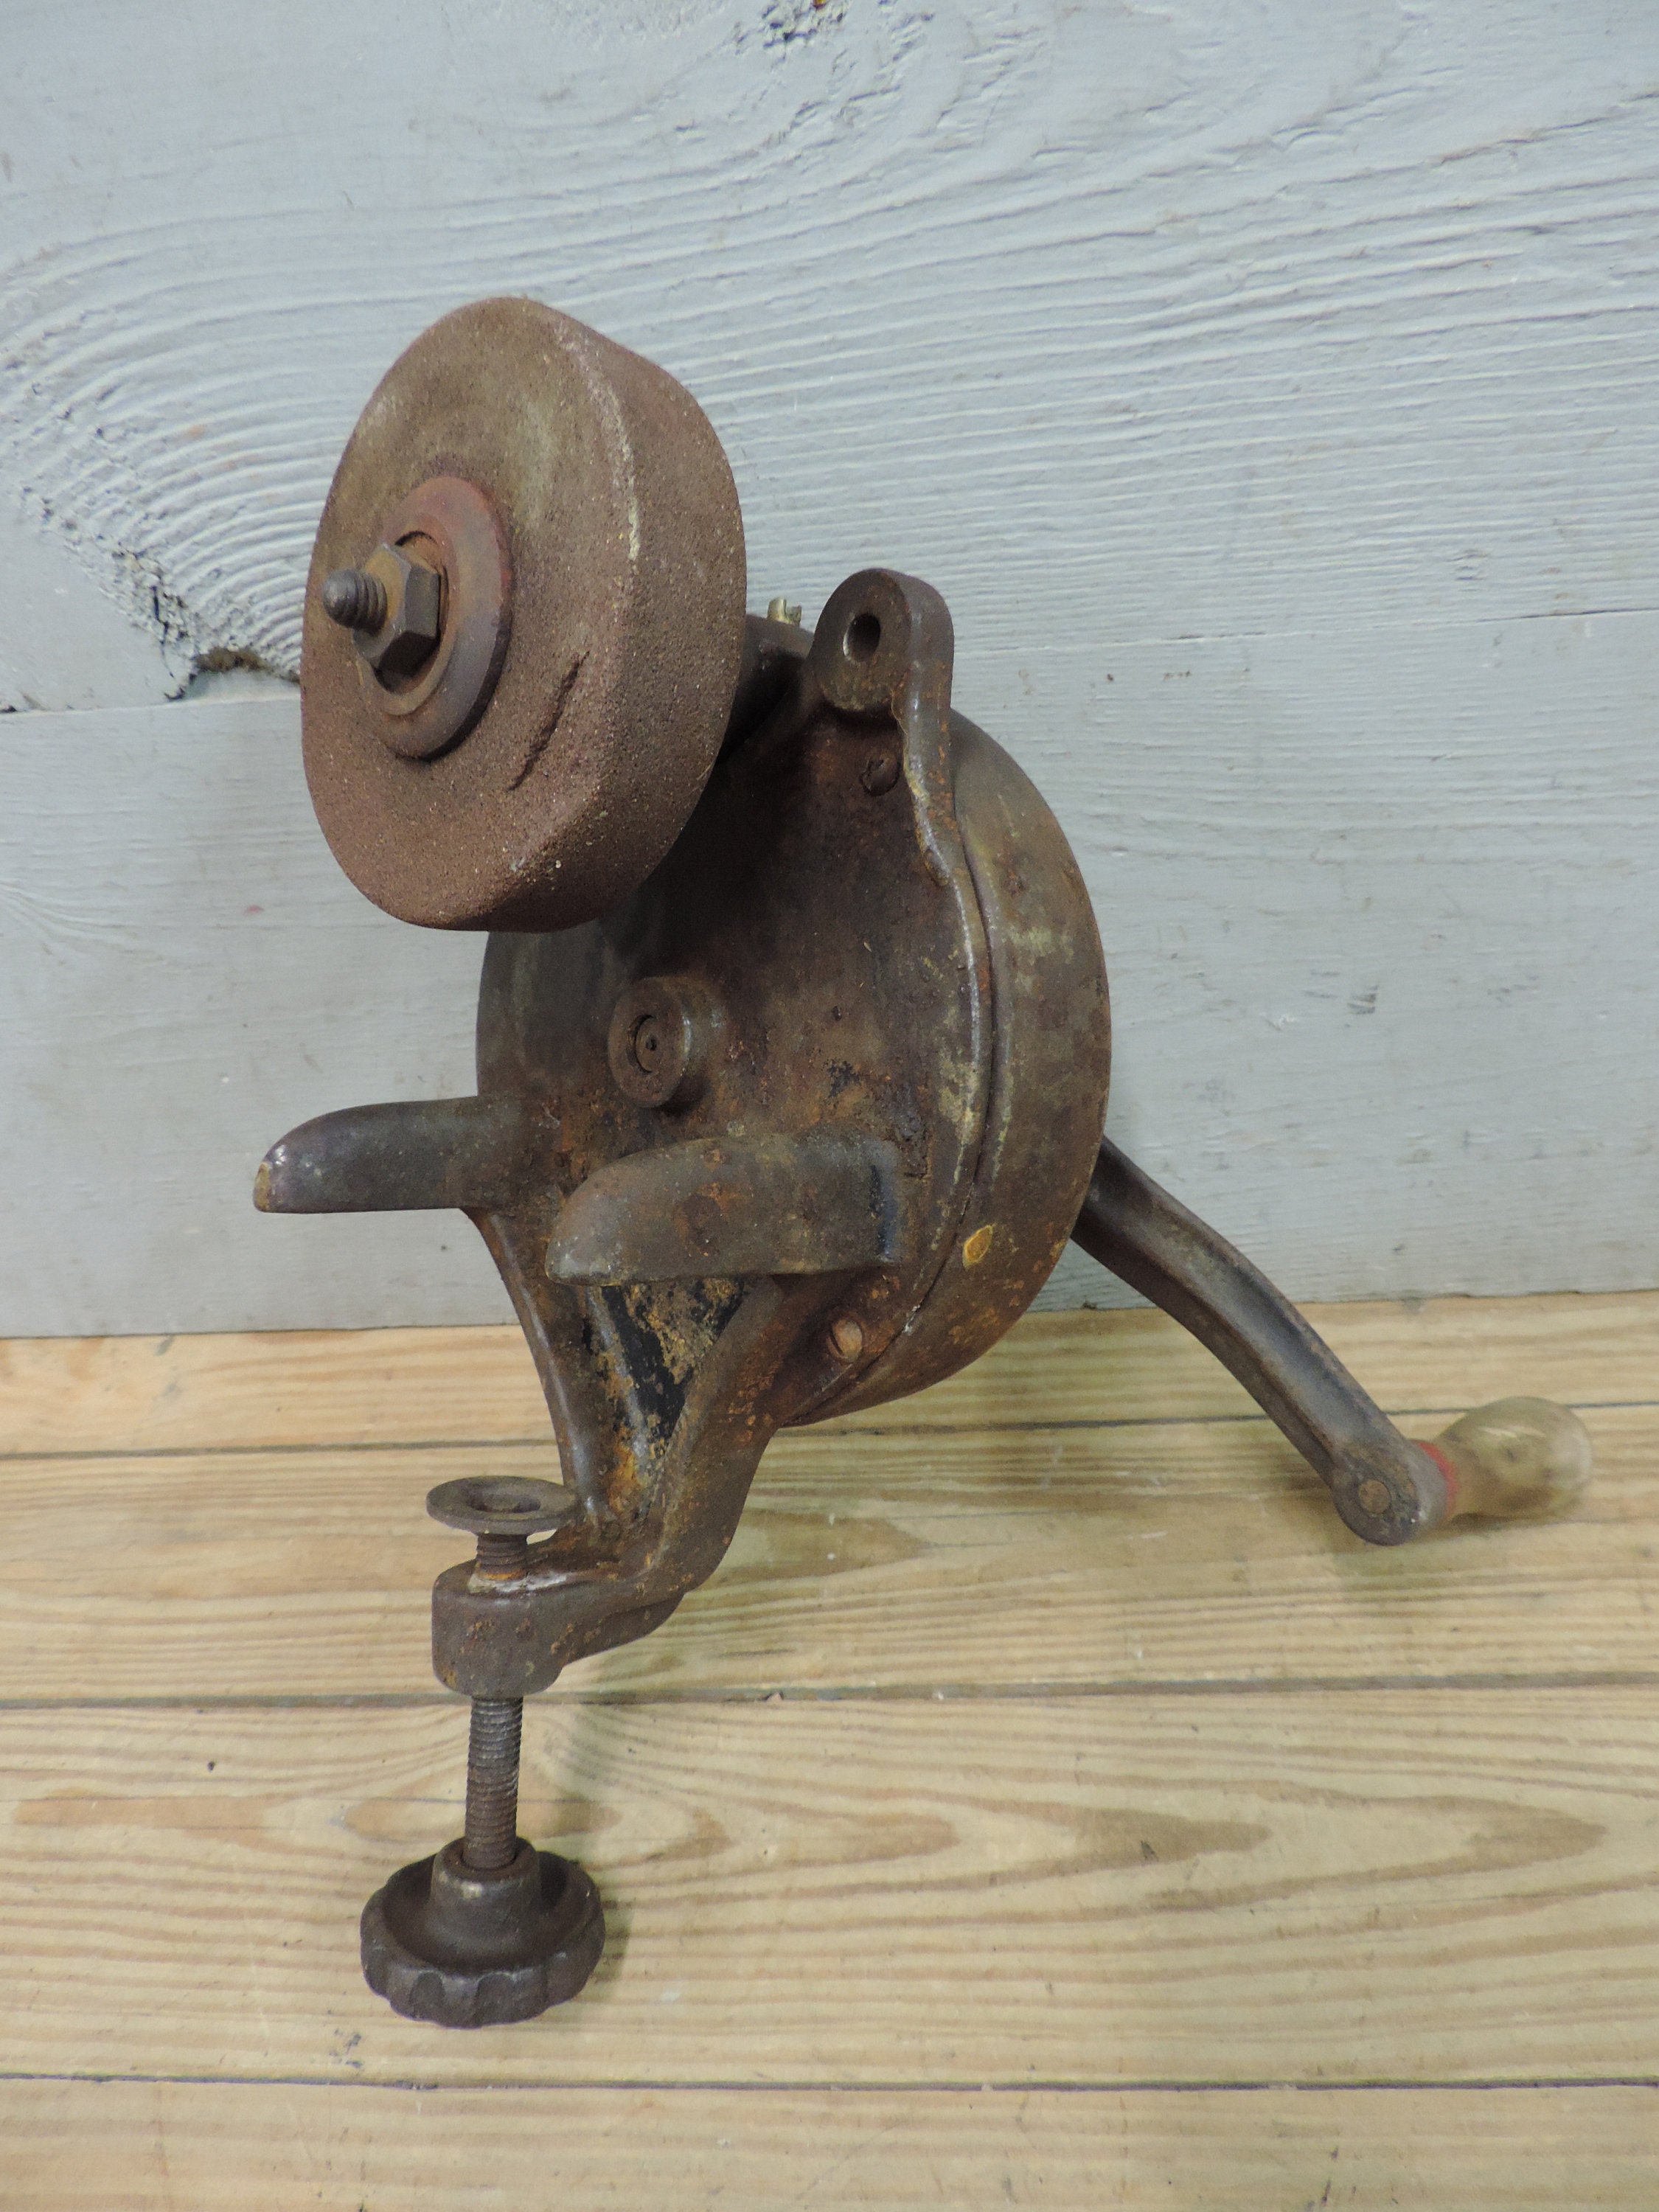 Antique Grinding Machine, Estimatedly 1940-1950s, Hand Crank, Bench  Grinder, Active, Made In Poland, PWSb-Active, Useable, Collectible, Rare